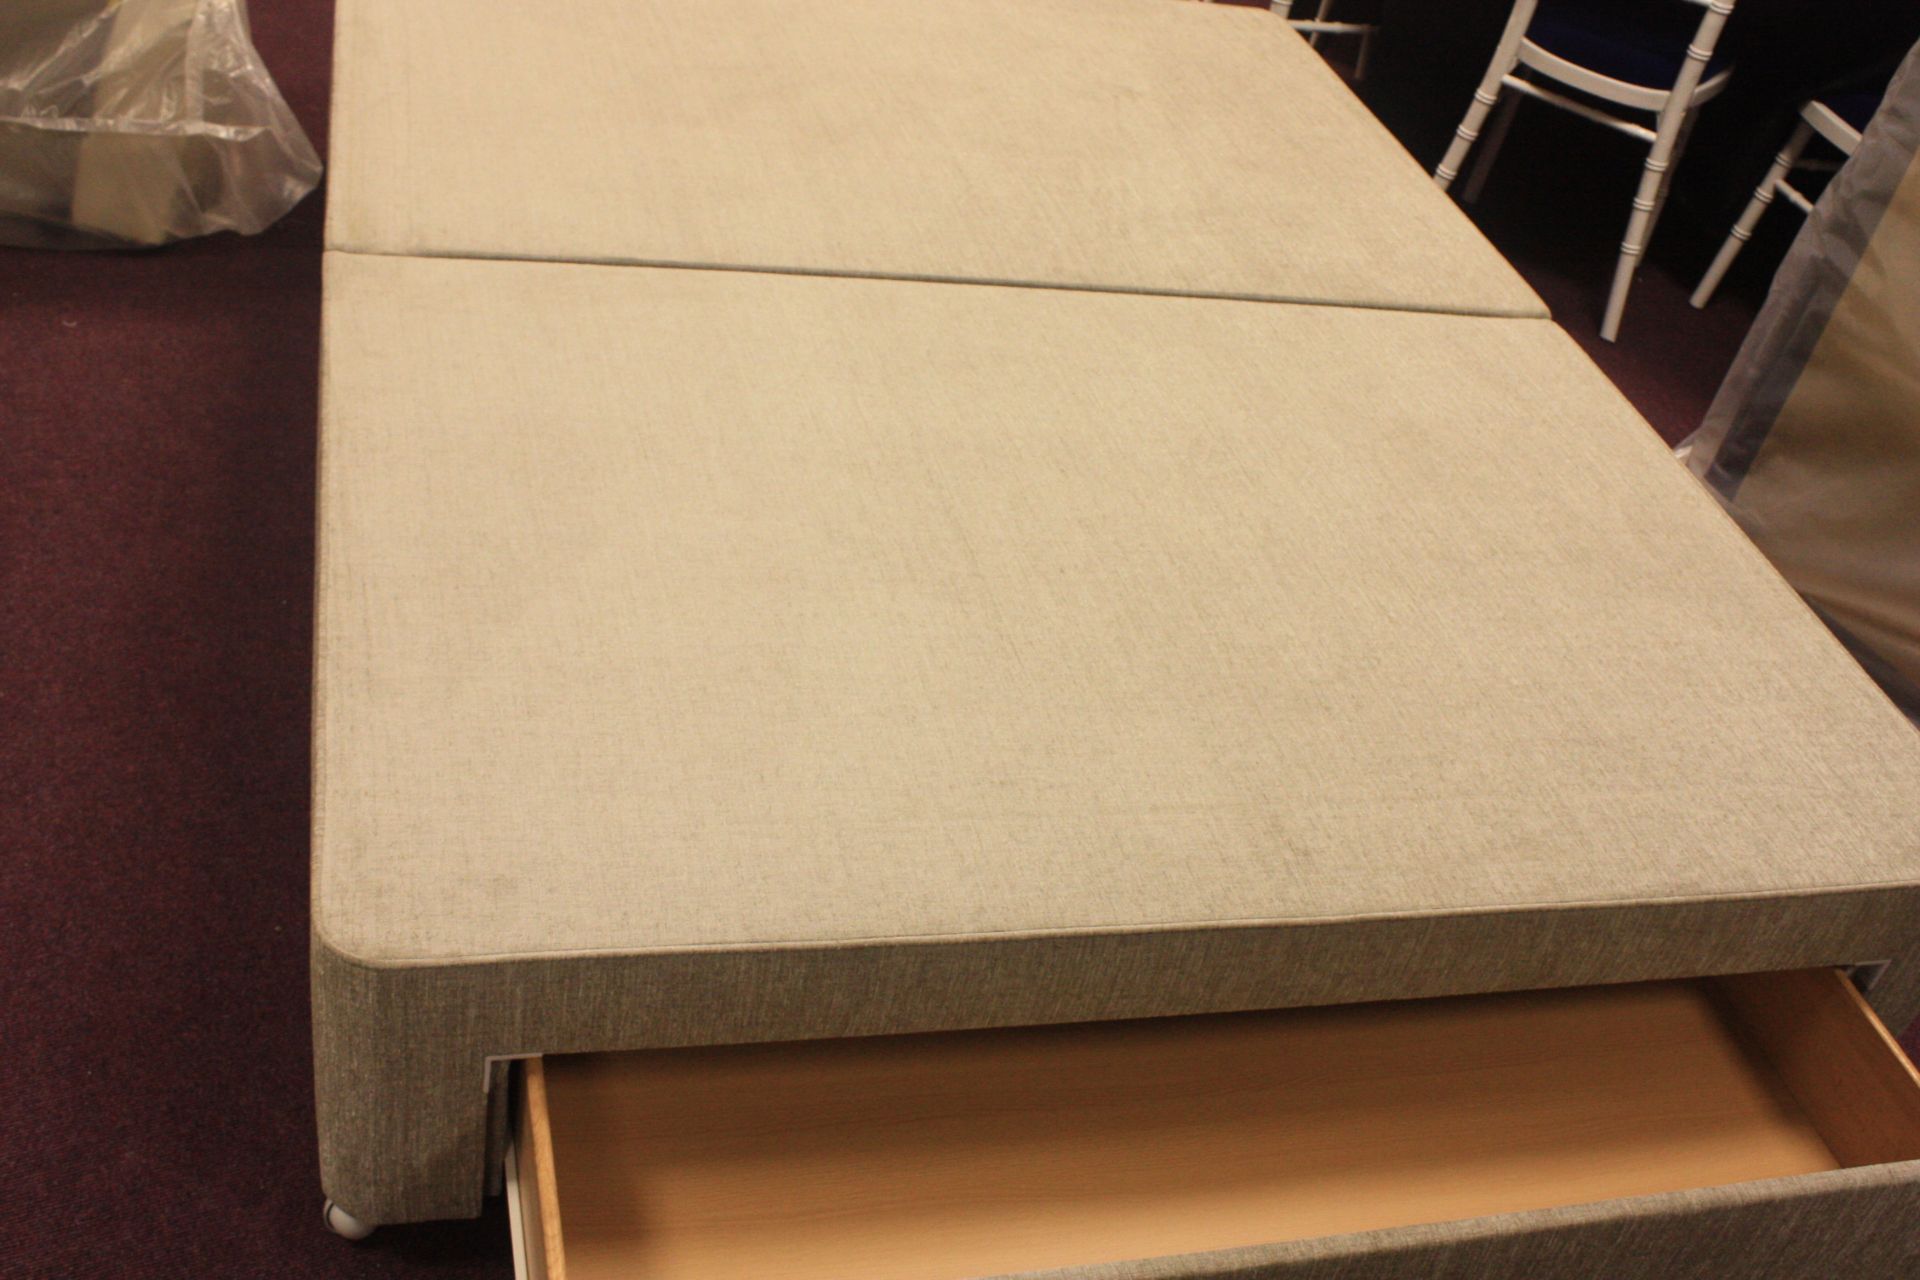 HARRISONS 150CM KING SIZE DIVAN WITH ALMEIRA 3200 MATTRESS DUAL FIRMNESS RRP £1200 - Image 3 of 3